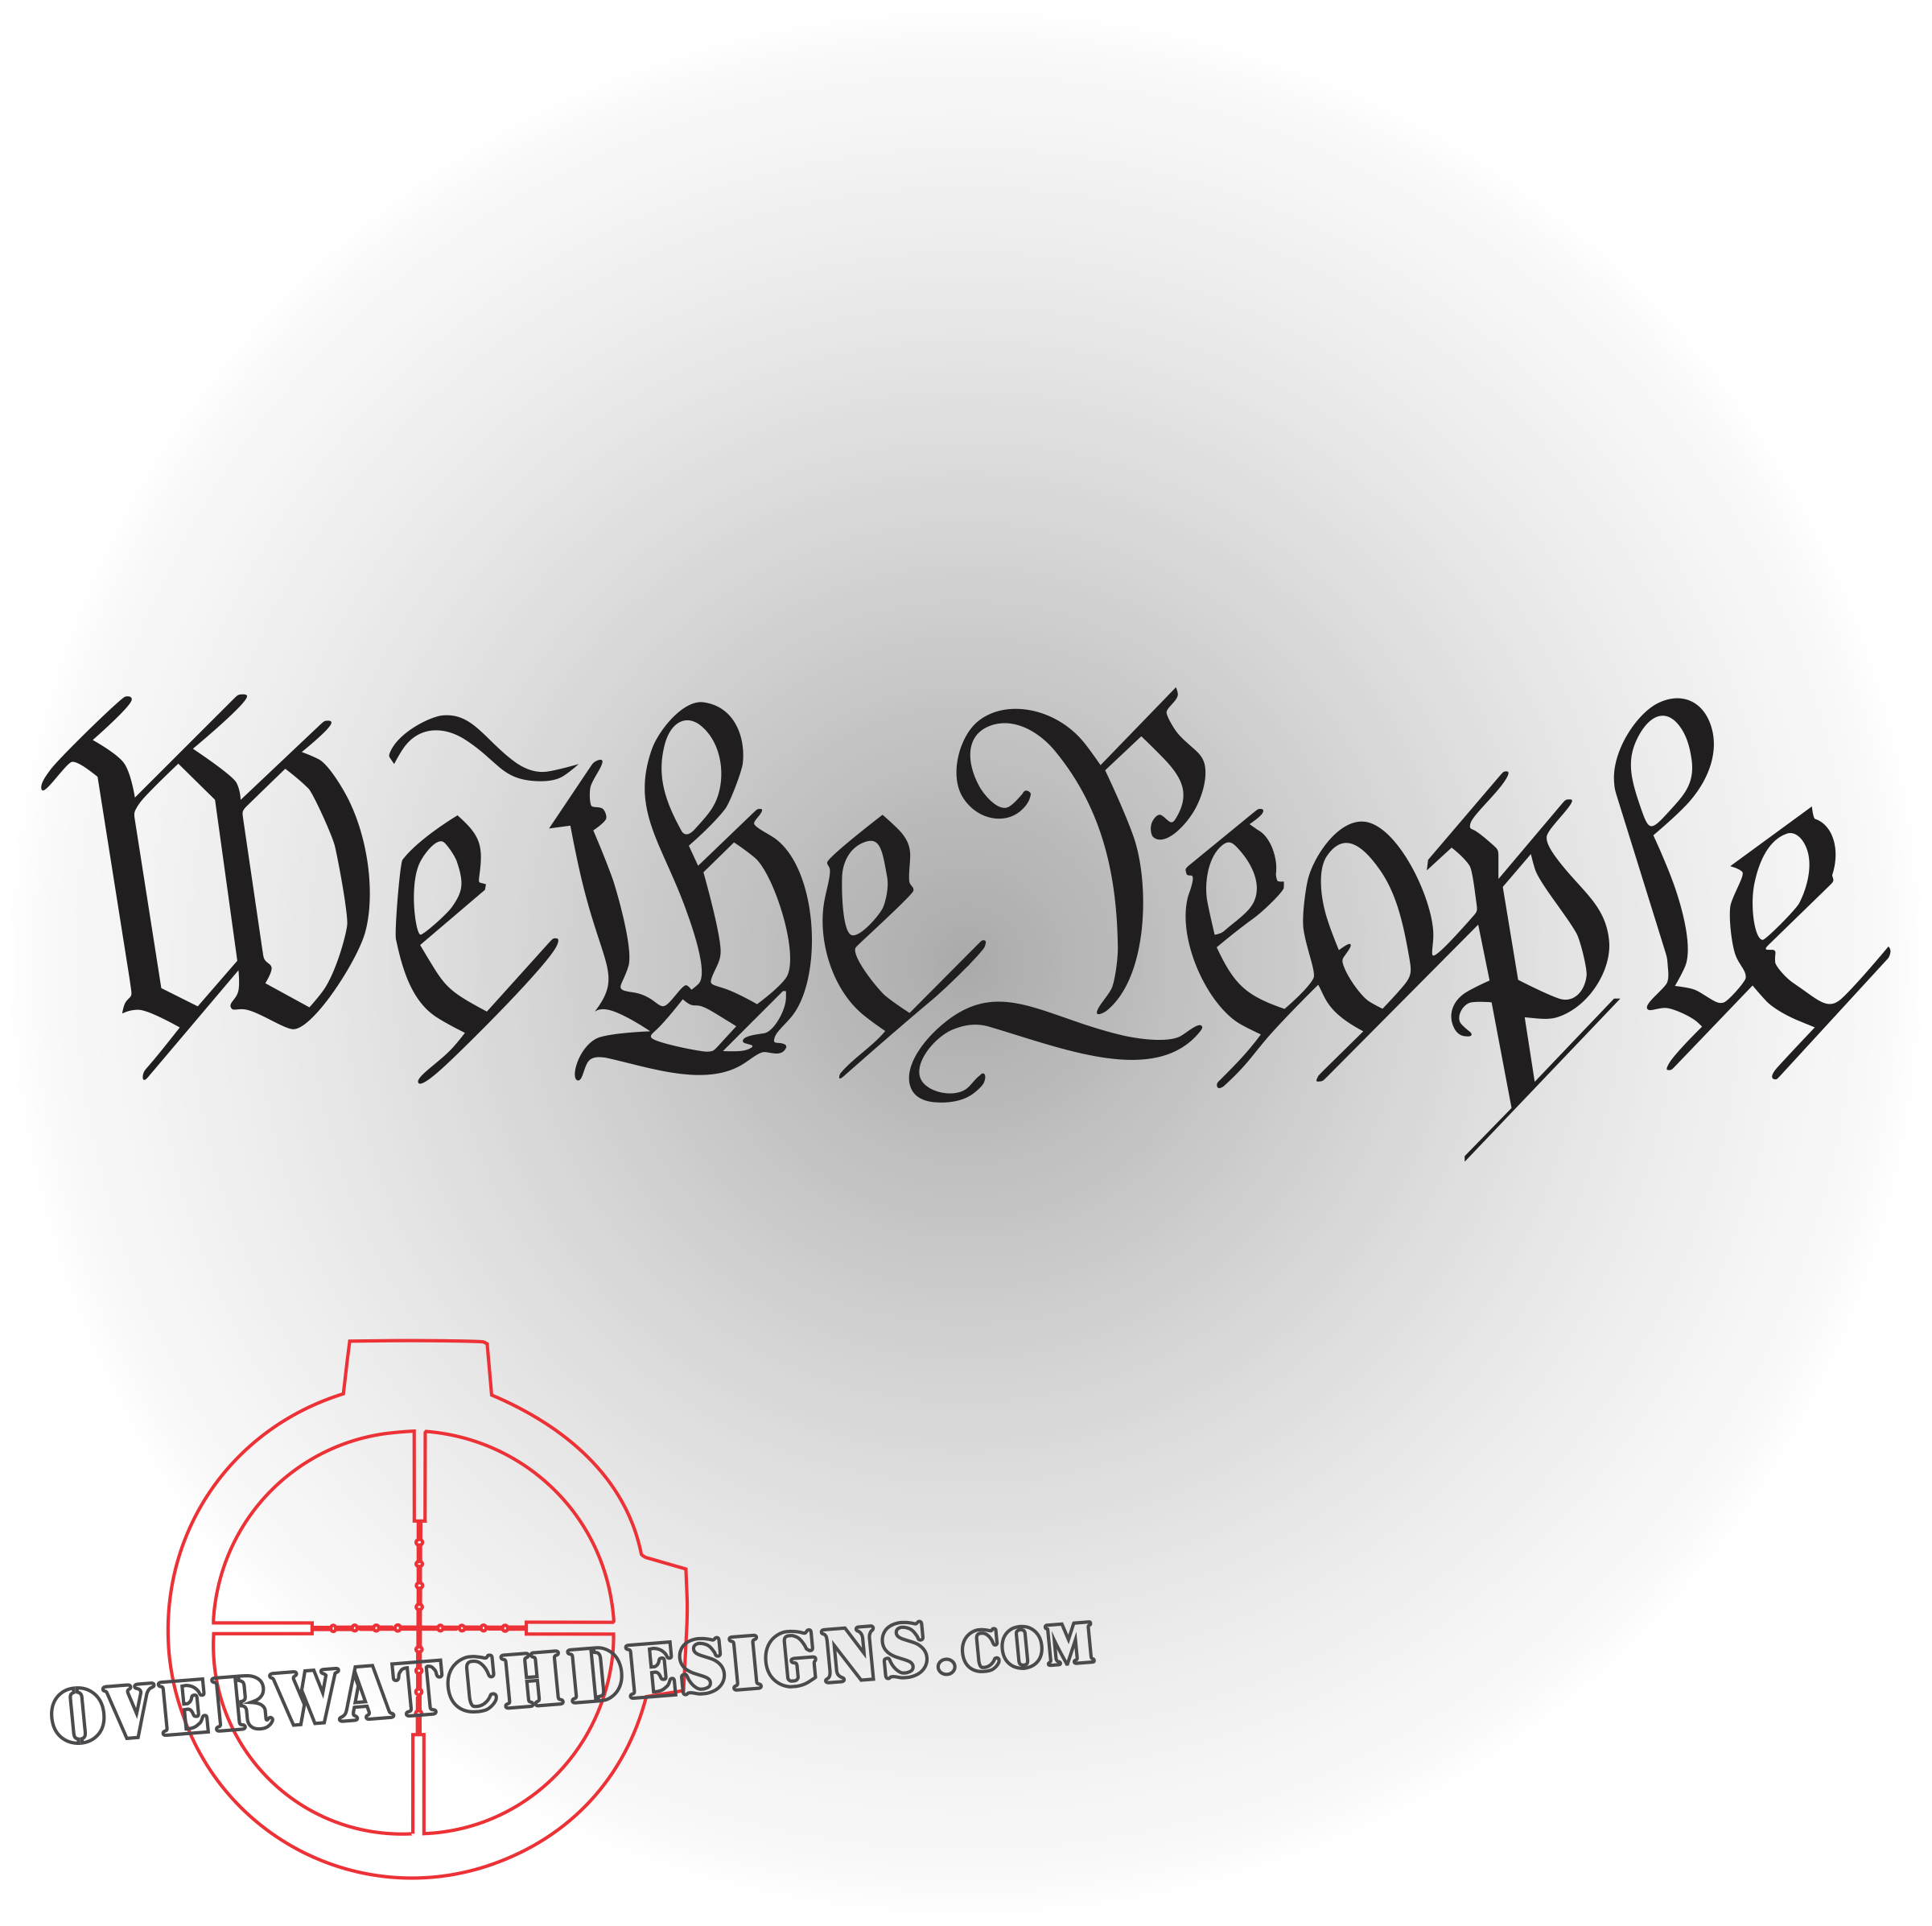 We the People Overwatch Designs